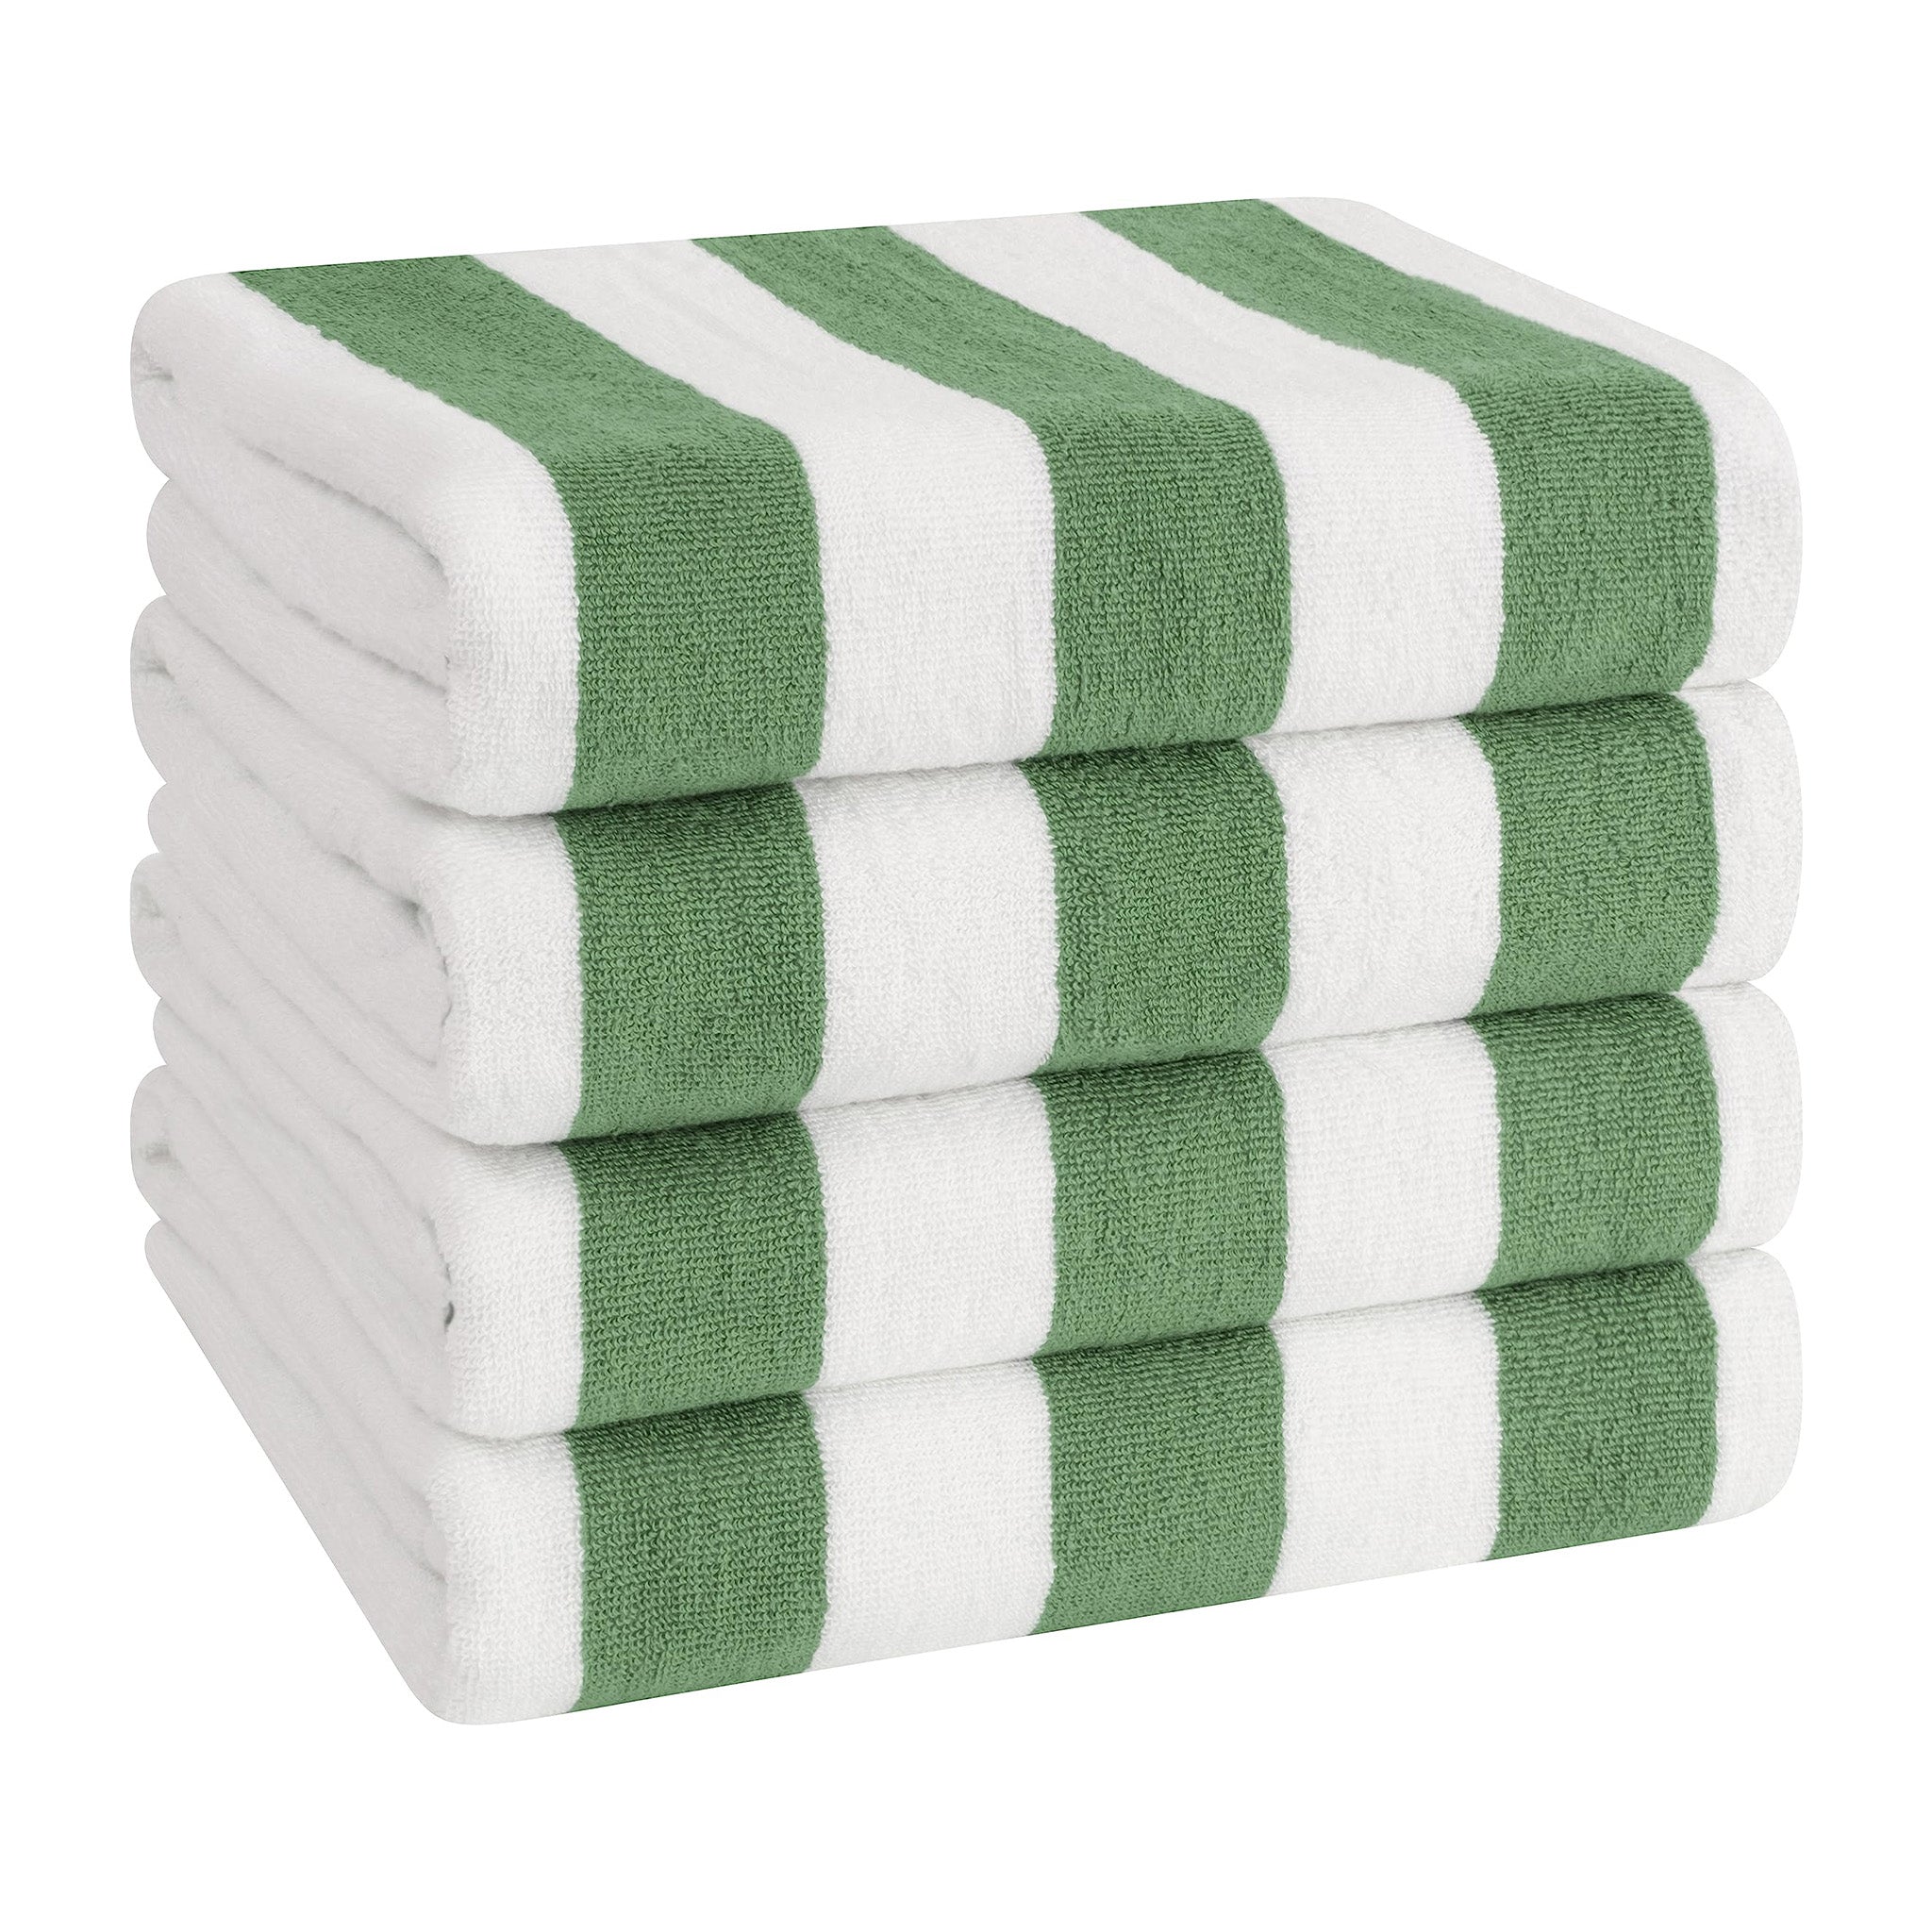 American Soft Linen 100% Cotton 4 Pack Beach Towels Cabana Striped Pool Towels -sage-green-1